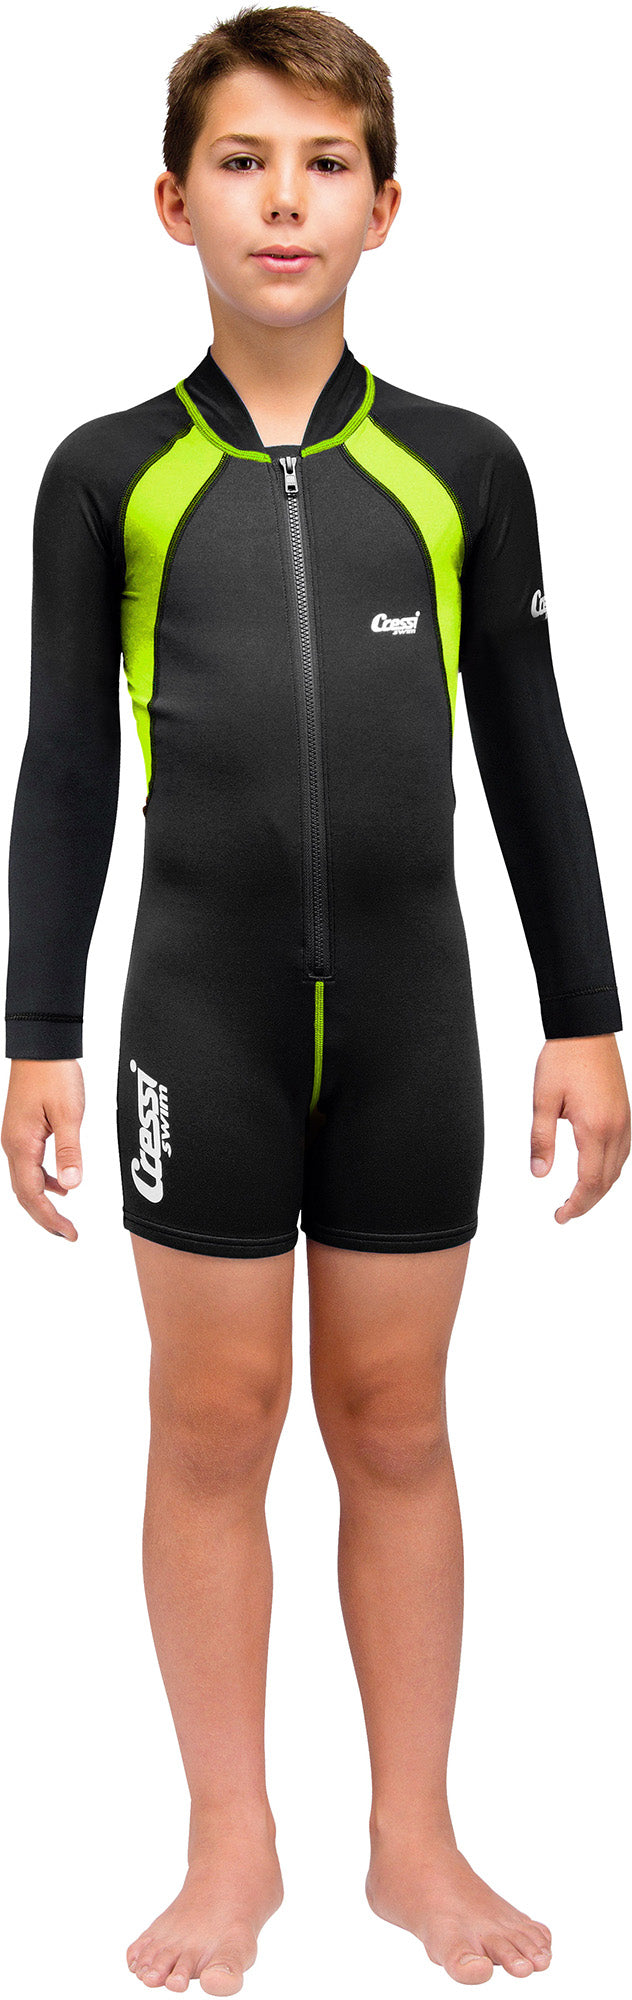 Cressi Kids Swimsuit in Neoprene 1.5mm for Boys and Girls 2 to 10 years old - Kids Swimsuit